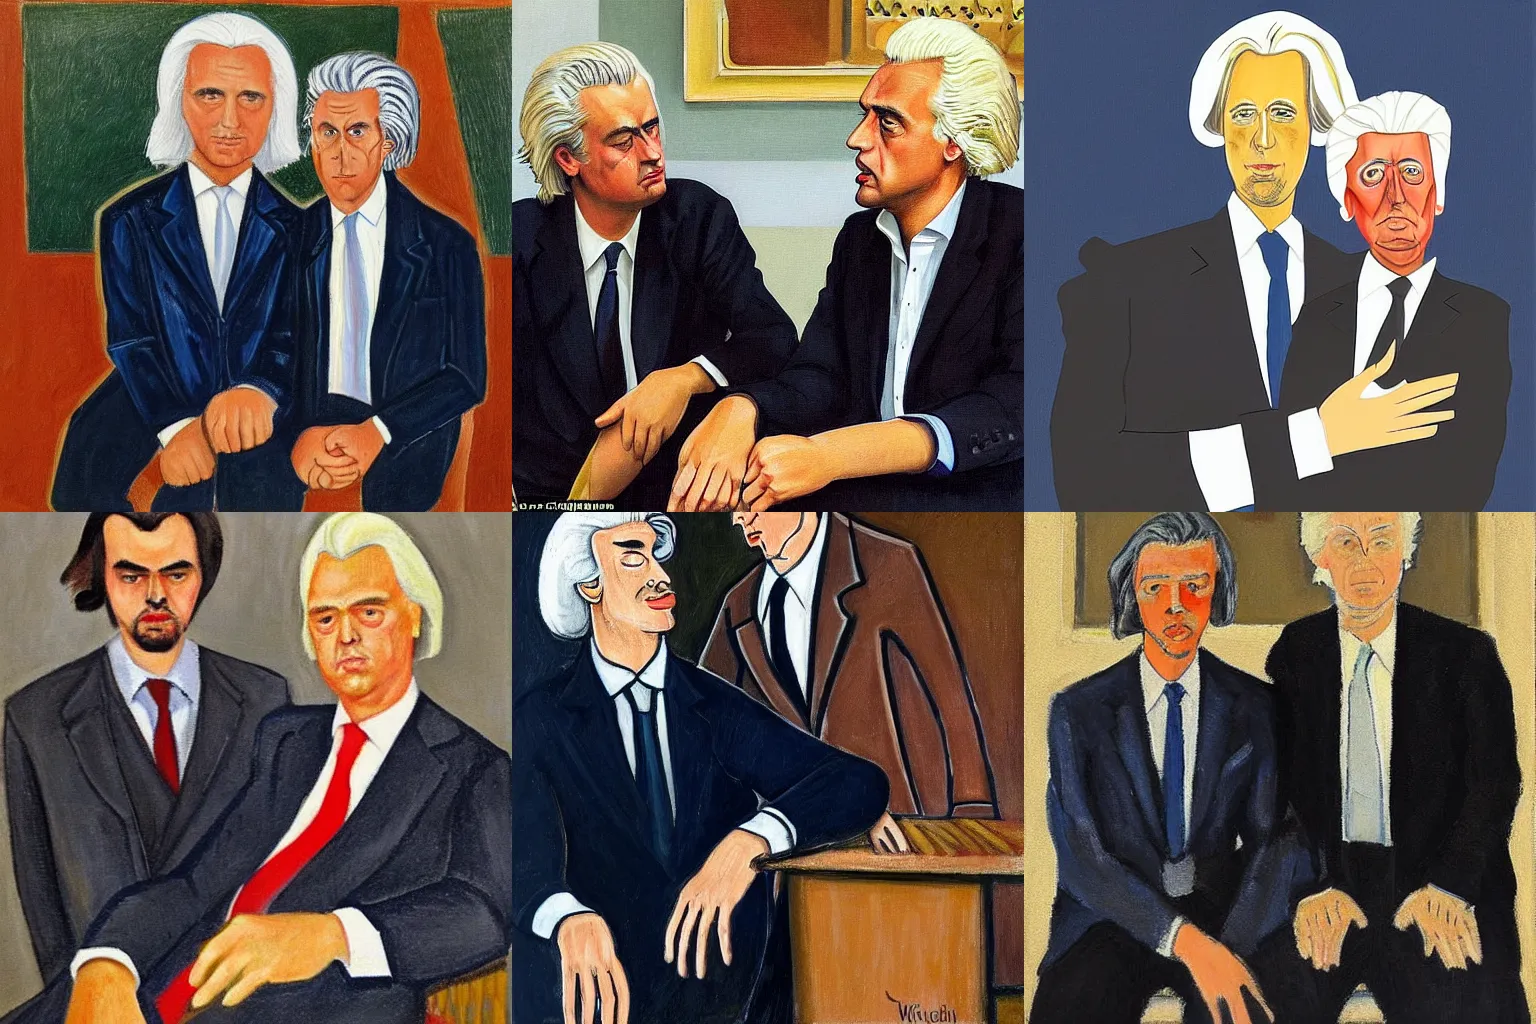 Prompt: Stationary portrait of Geert Wilders placing his hand on the shoulder of Thierry Baudet who is sitting on his side in the style of Charley Toorop